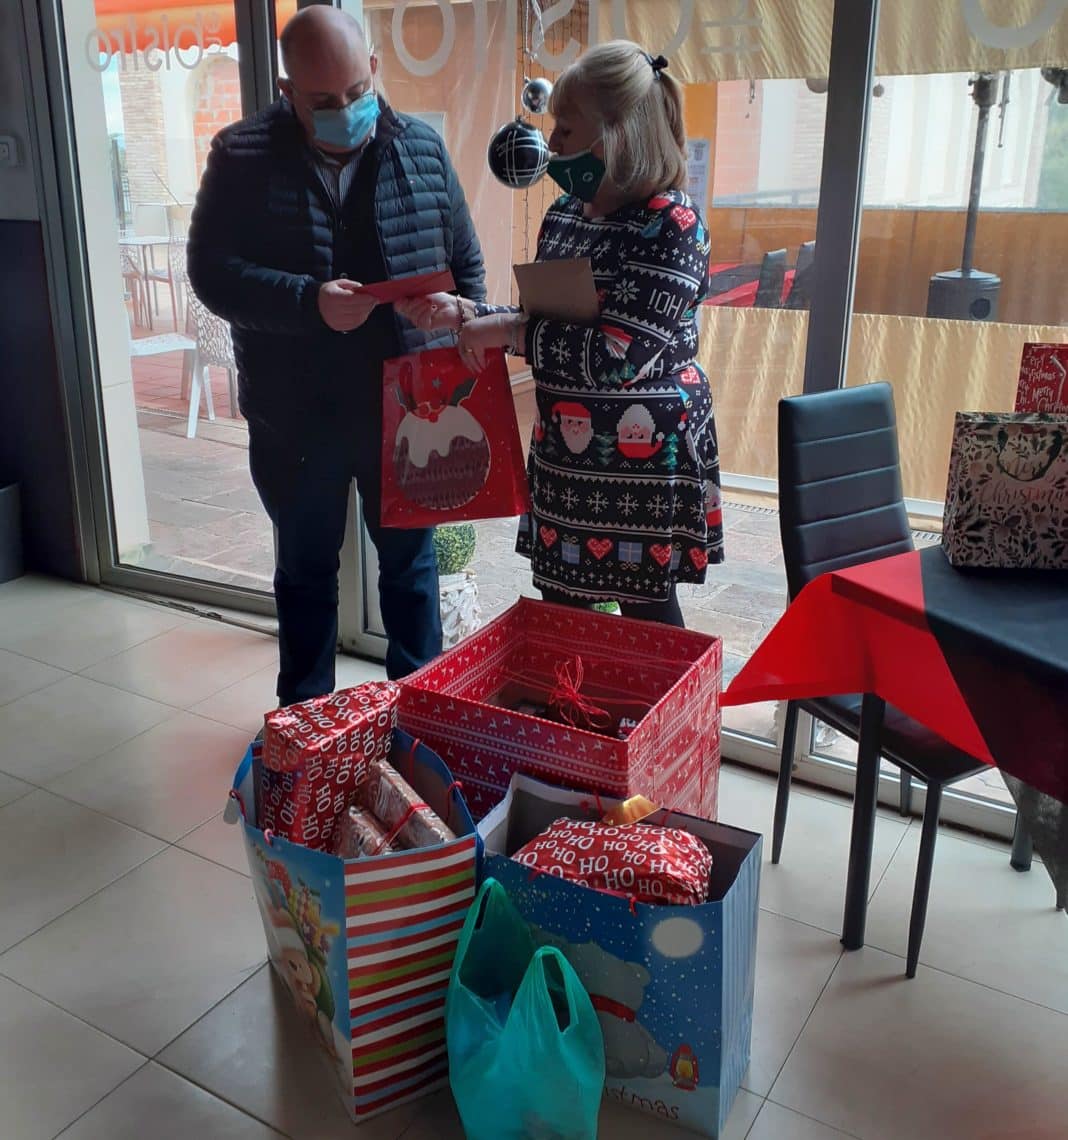 We raised over €1200 which was spent on an individual gift for each if the 54 children